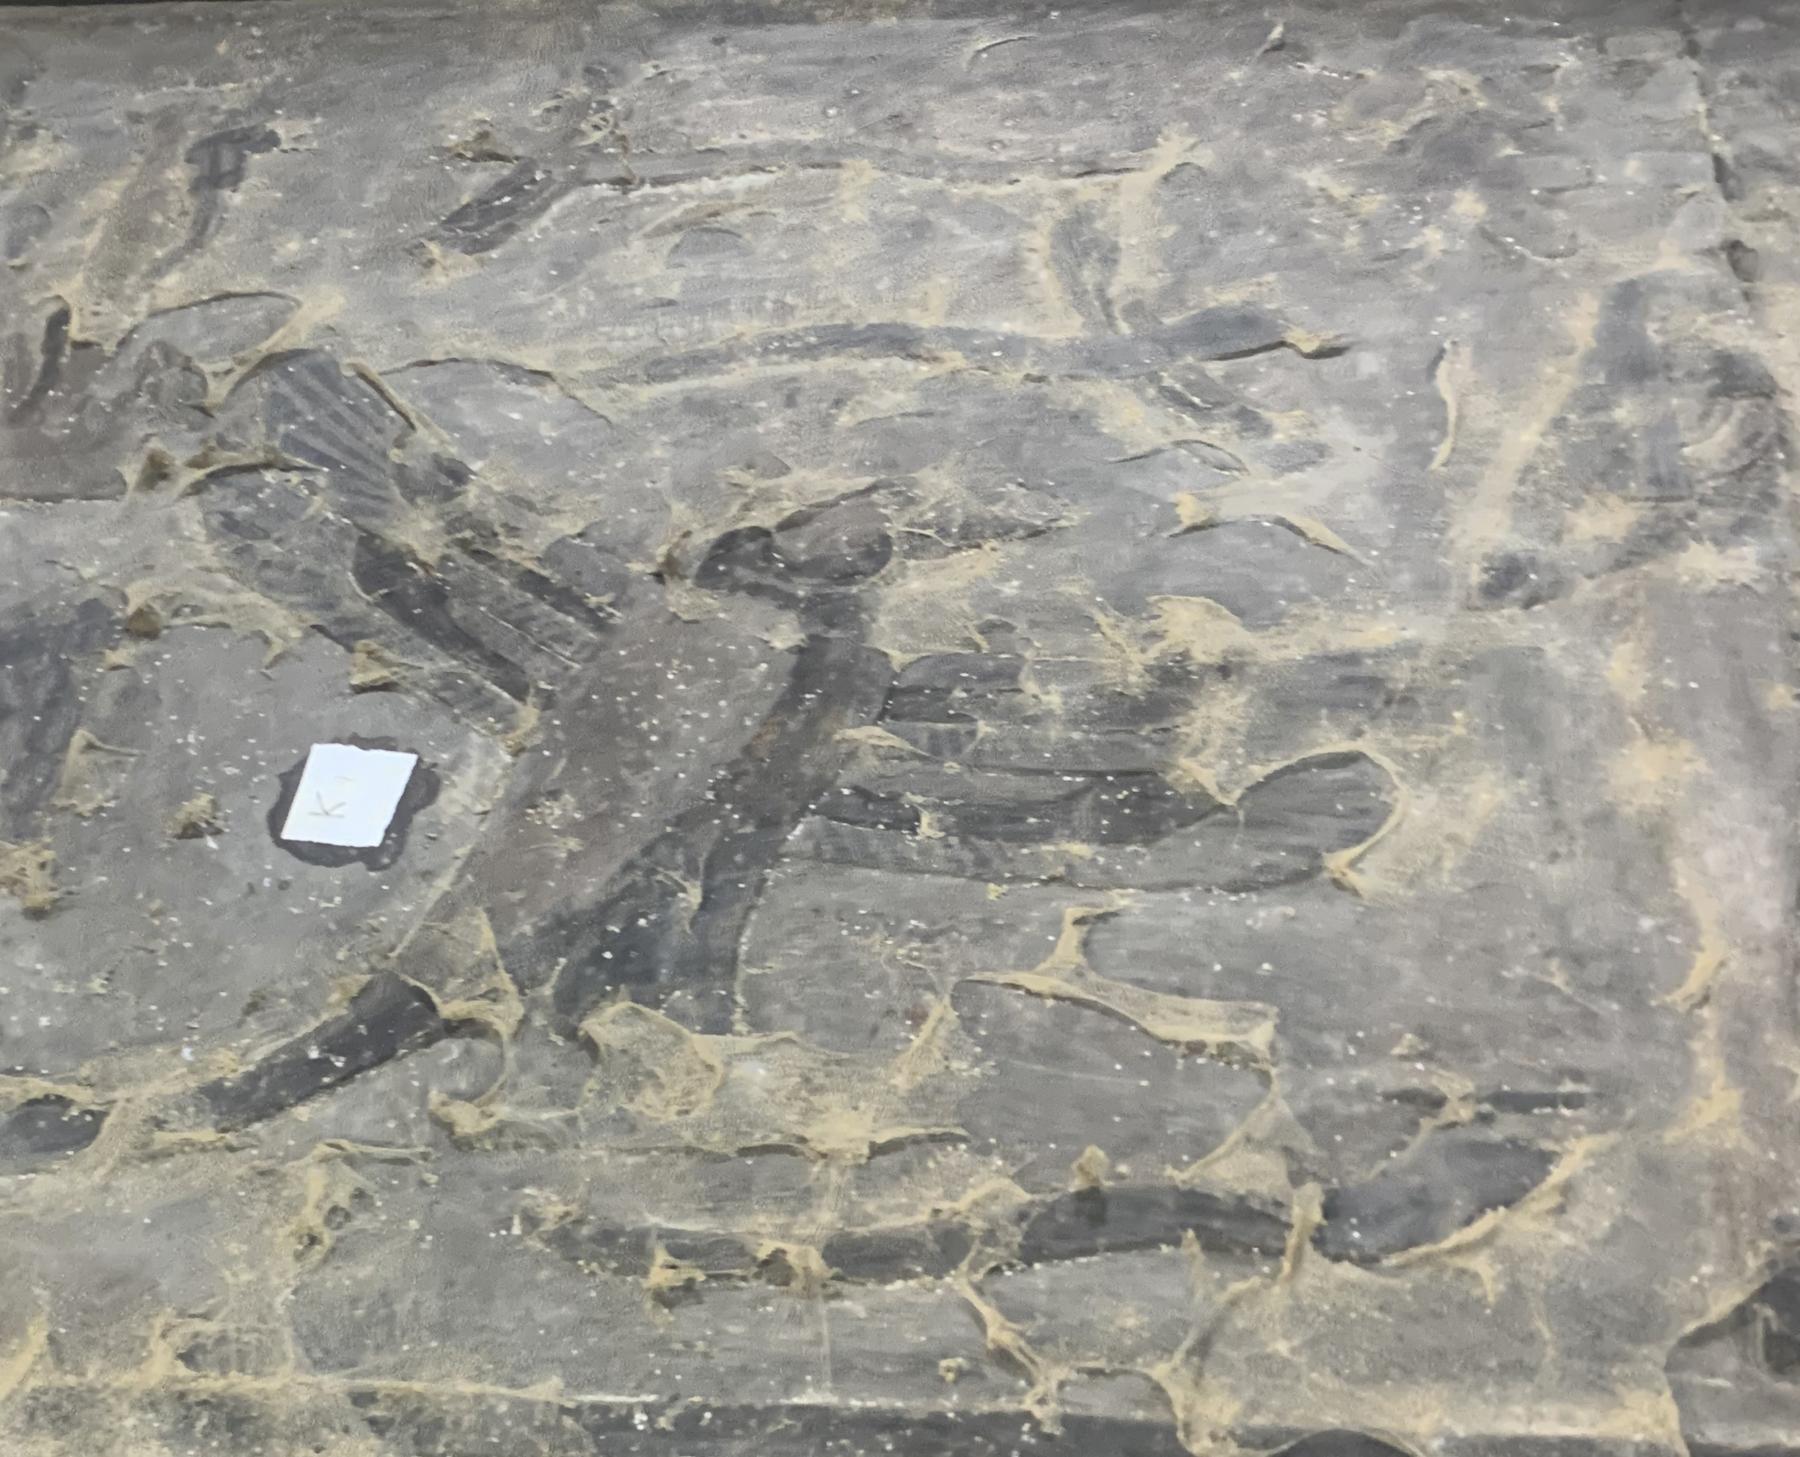 Depiction of winged snakes and an animal with bird, crocodile and snake features, pre-restoration